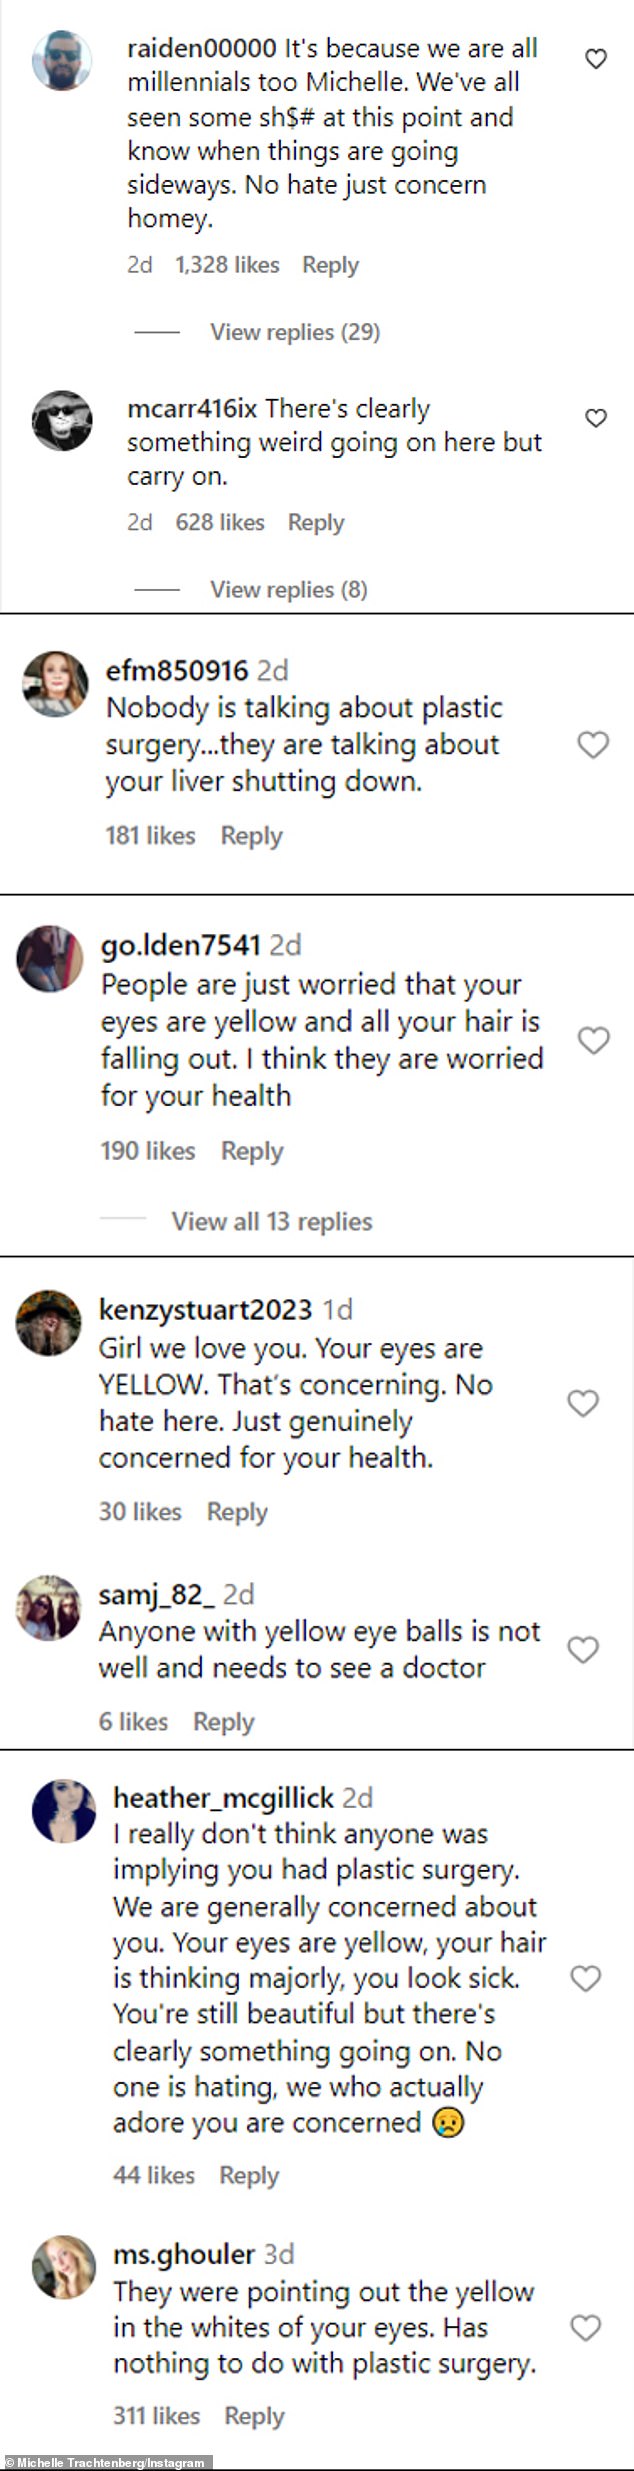 Instagram user @heather_mcgillick wrote: 'I honestly don't think anyone was suggesting you had plastic surgery.  We are generally concerned about you.  Your eyes are yellow, your hair is thinning, you look sick